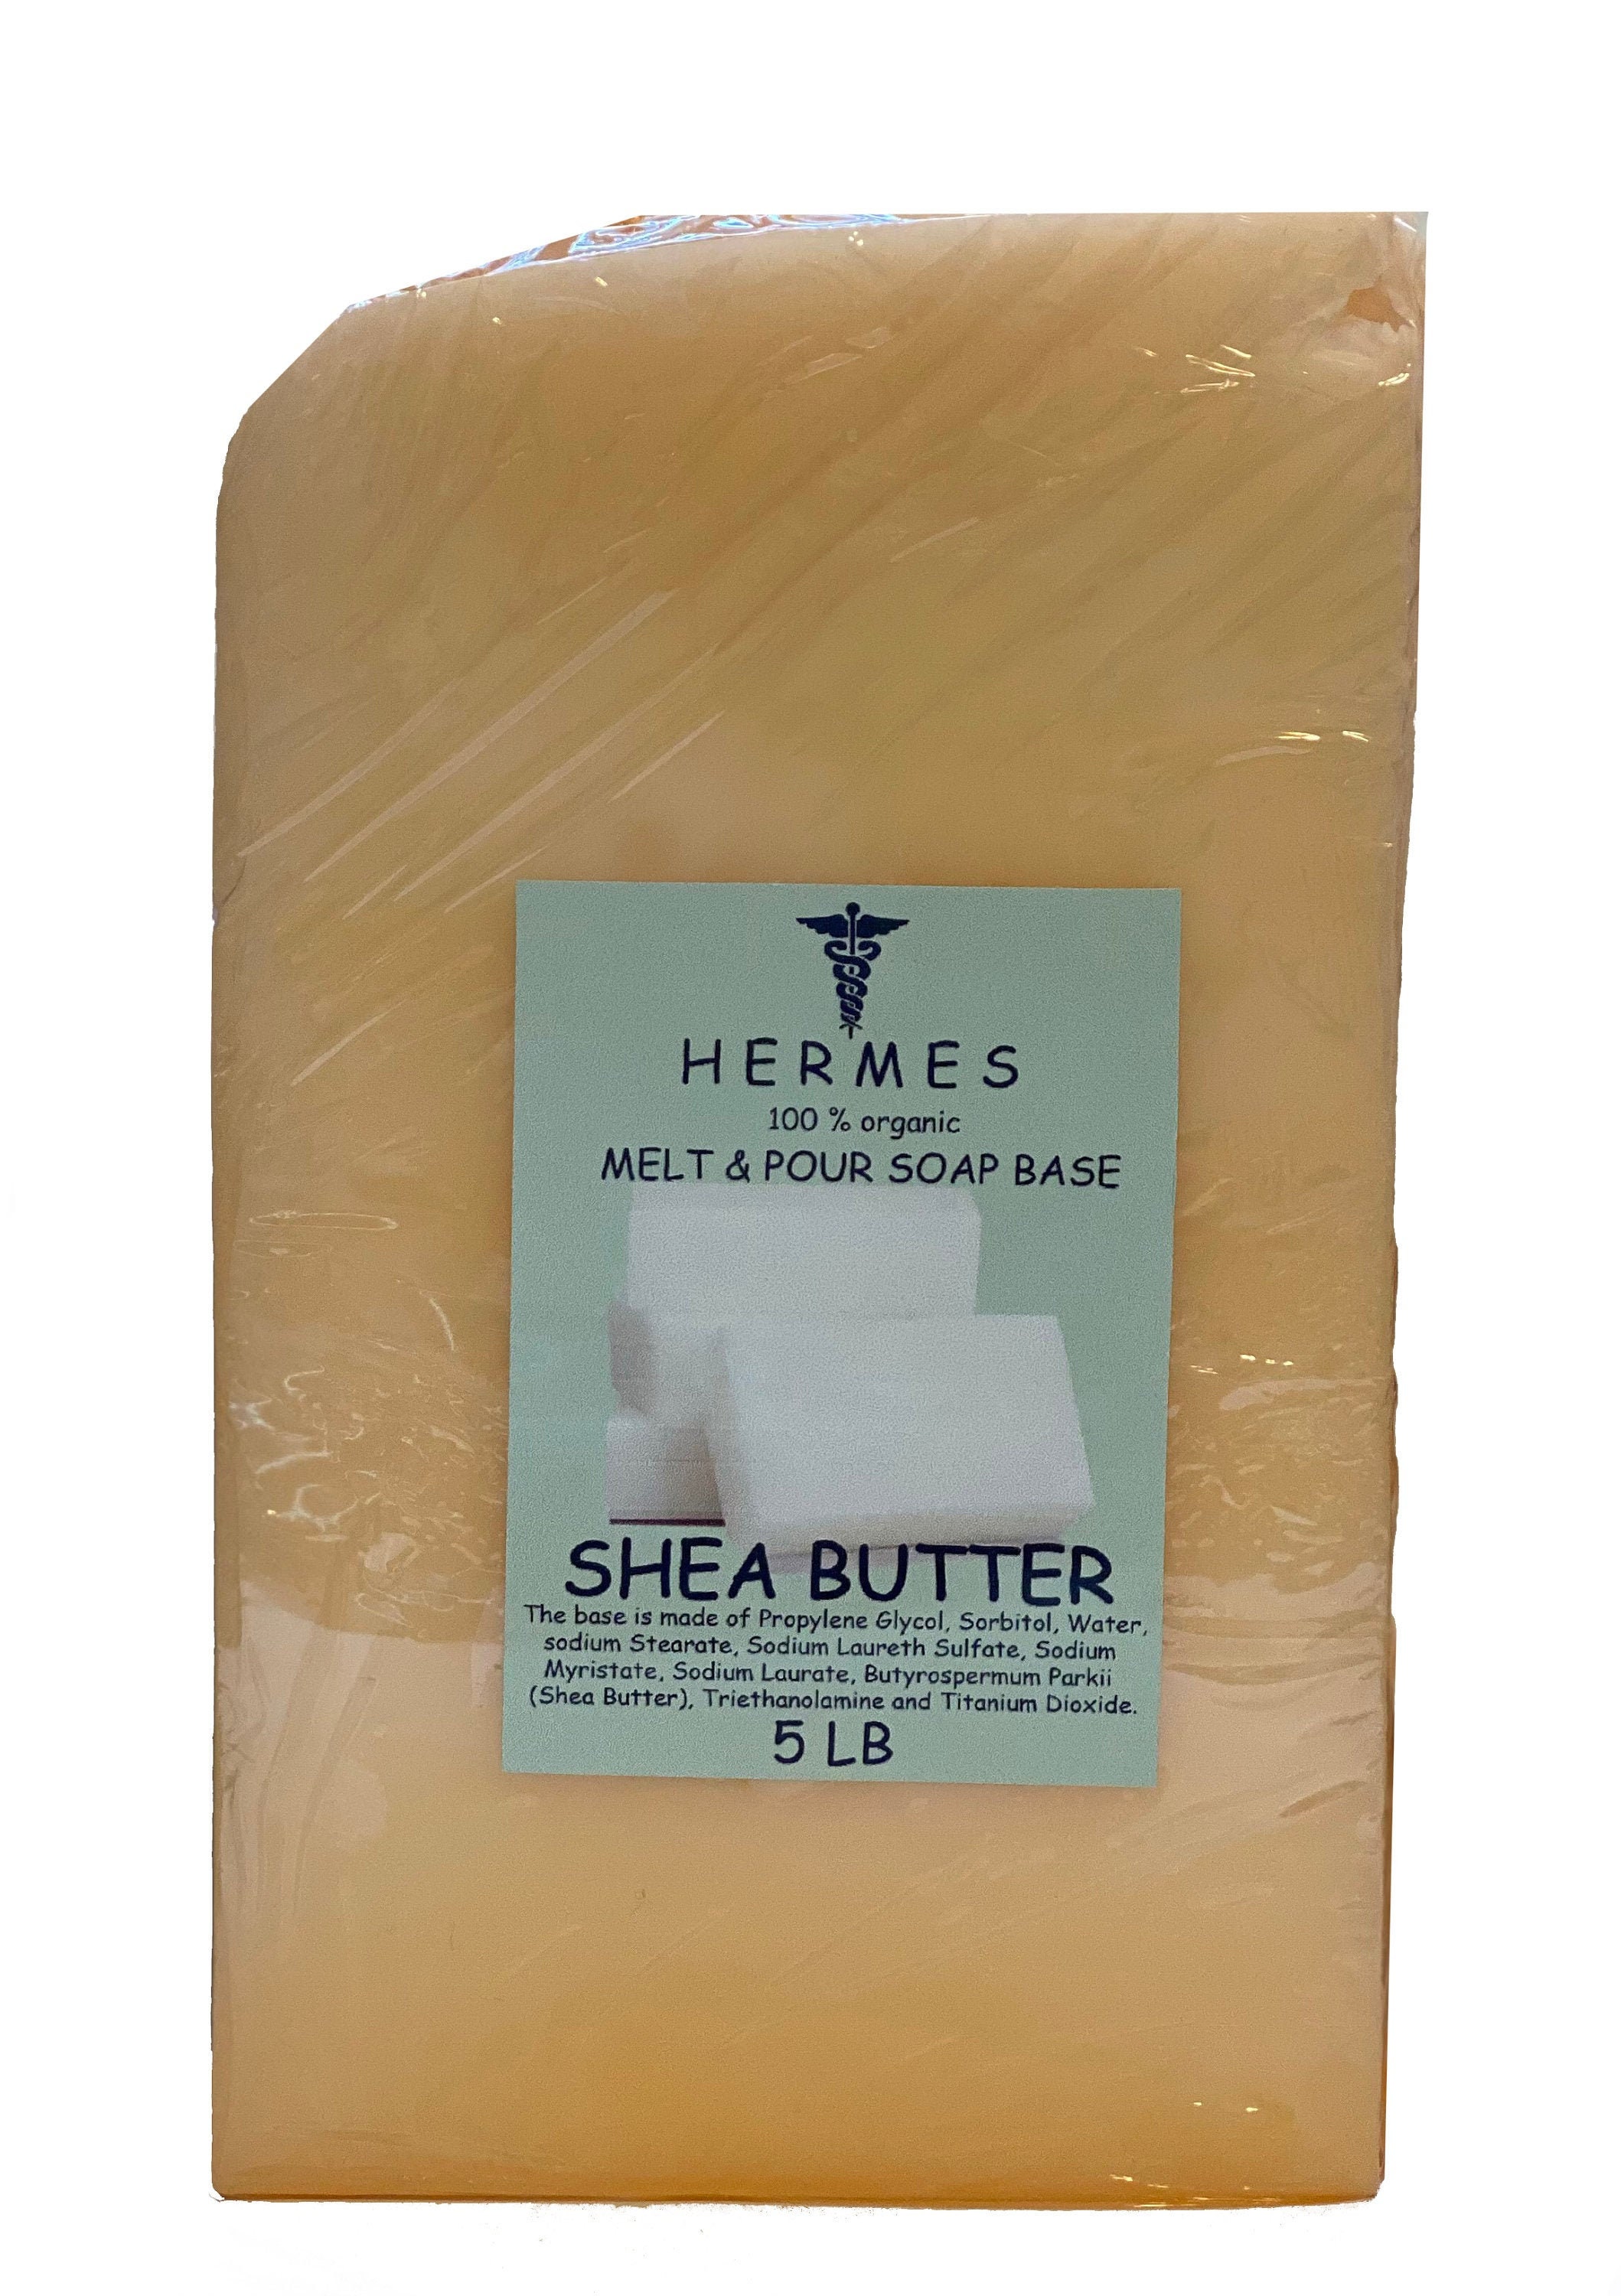 velona 2 LB - Shea Butter Soap Base Pre-Cut Cubes | SLS/SLES Free |  Glycerin Melt and Pour | Natural…See more velona 2 LB - Shea Butter Soap  Base